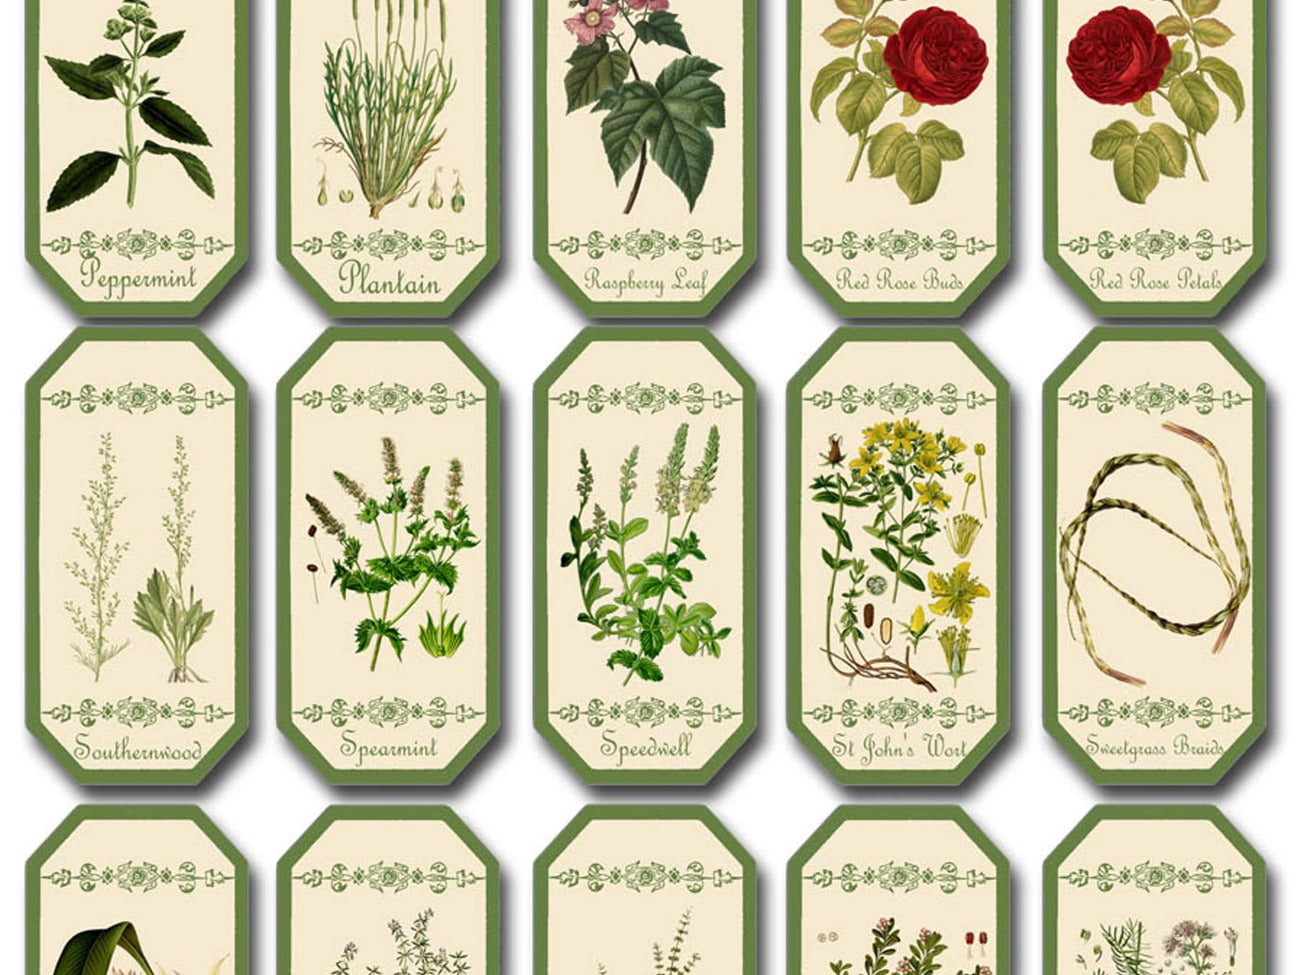 100 HERBAL APOTHECARY LABELS Printable